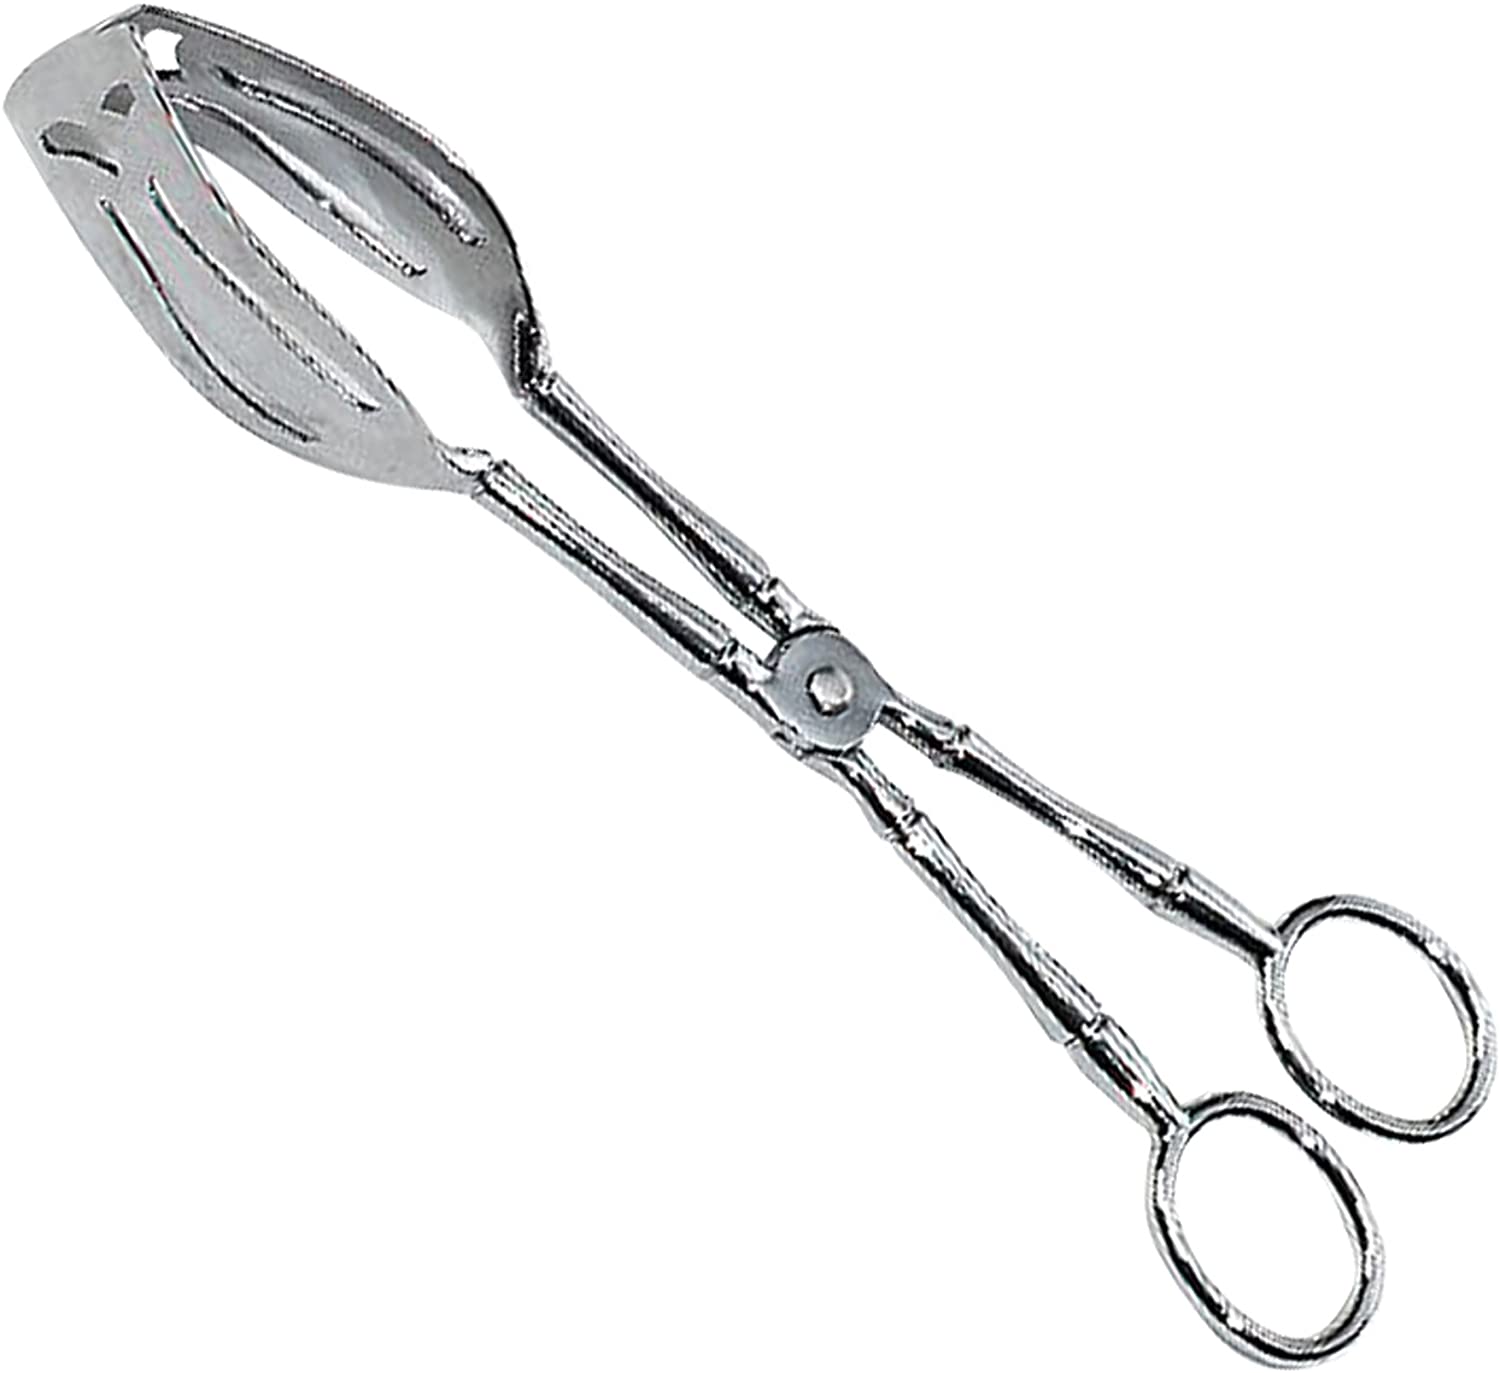 Ingenio von Tefal axentia Pastry tongs in silver, approx. 24 cm long kitchen tongs with die-cast chrome-plated